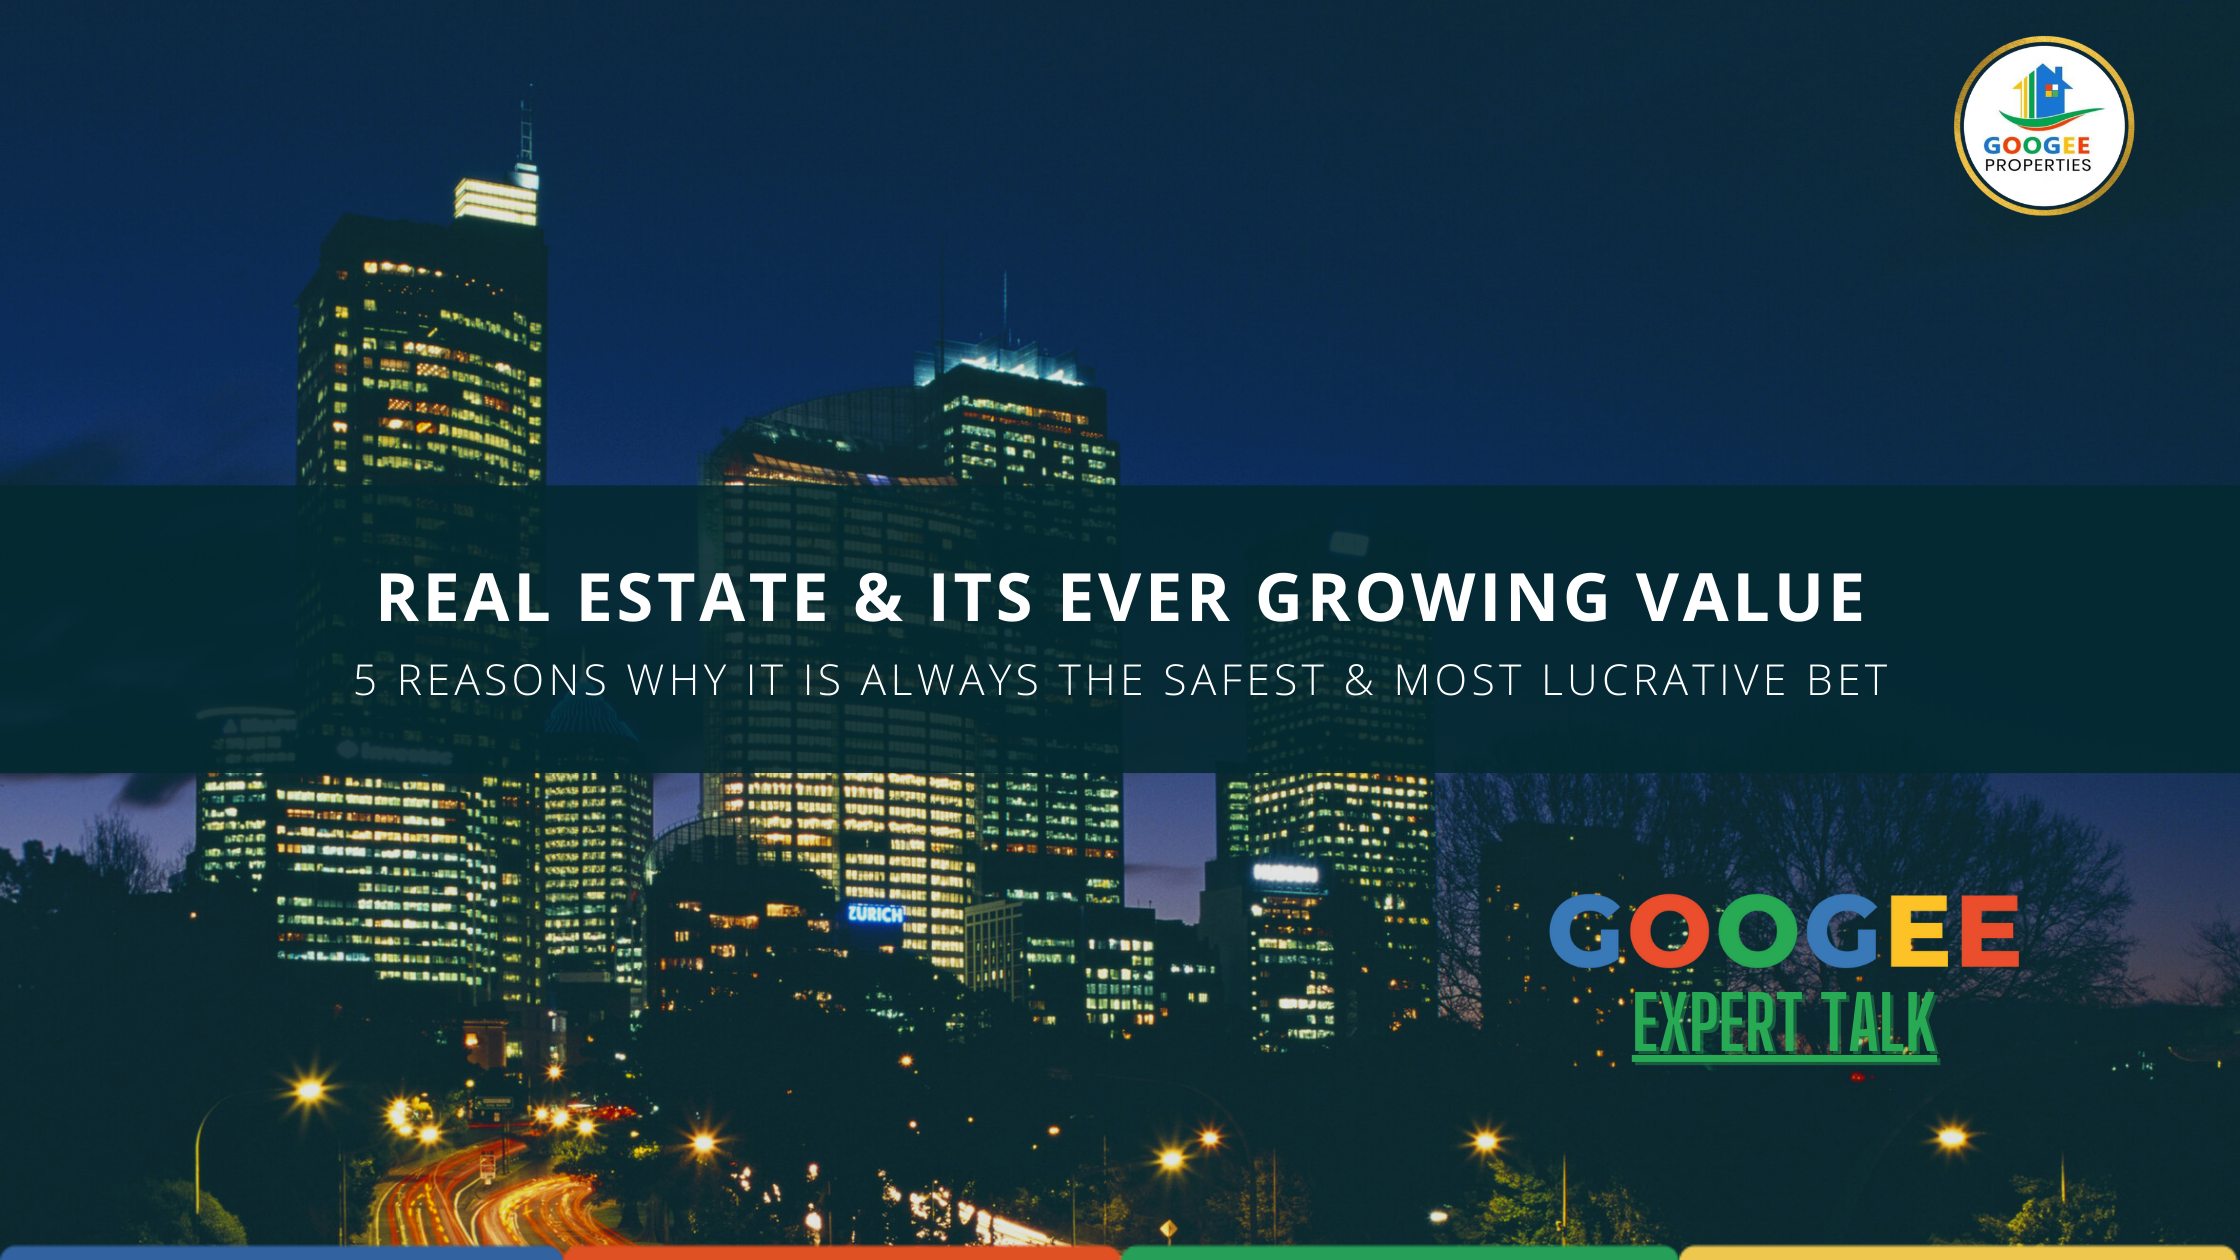 REAL-ESTATE AND ITS EVER-GROWING VALUE